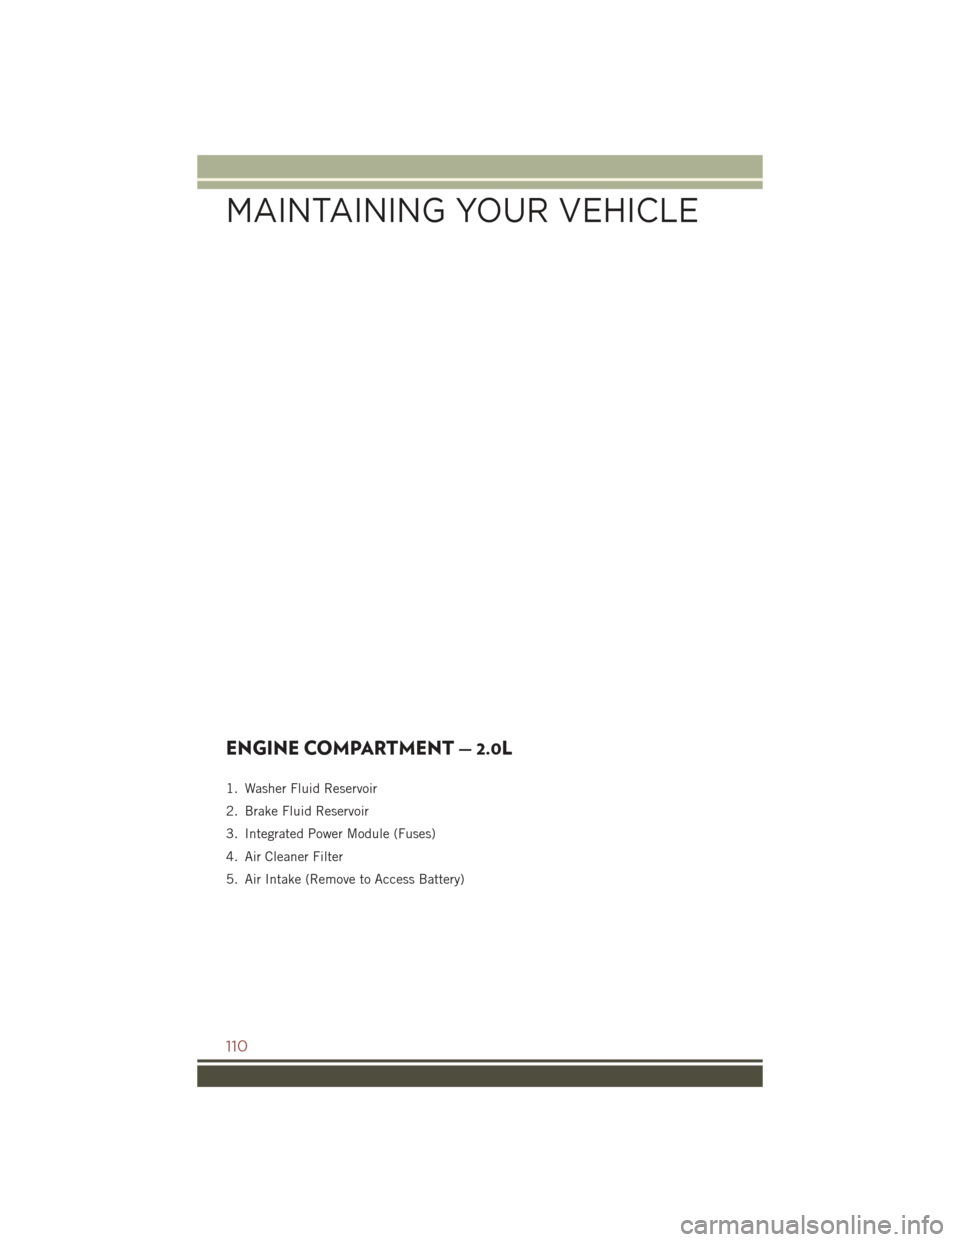 JEEP COMPASS 2016 1.G User Guide ENGINE COMPARTMENT — 2.0L
1. Washer Fluid Reservoir
2. Brake Fluid Reservoir
3. Integrated Power Module (Fuses)
4. Air Cleaner Filter
5. Air Intake (Remove to Access Battery)
MAINTAINING YOUR VEHICL